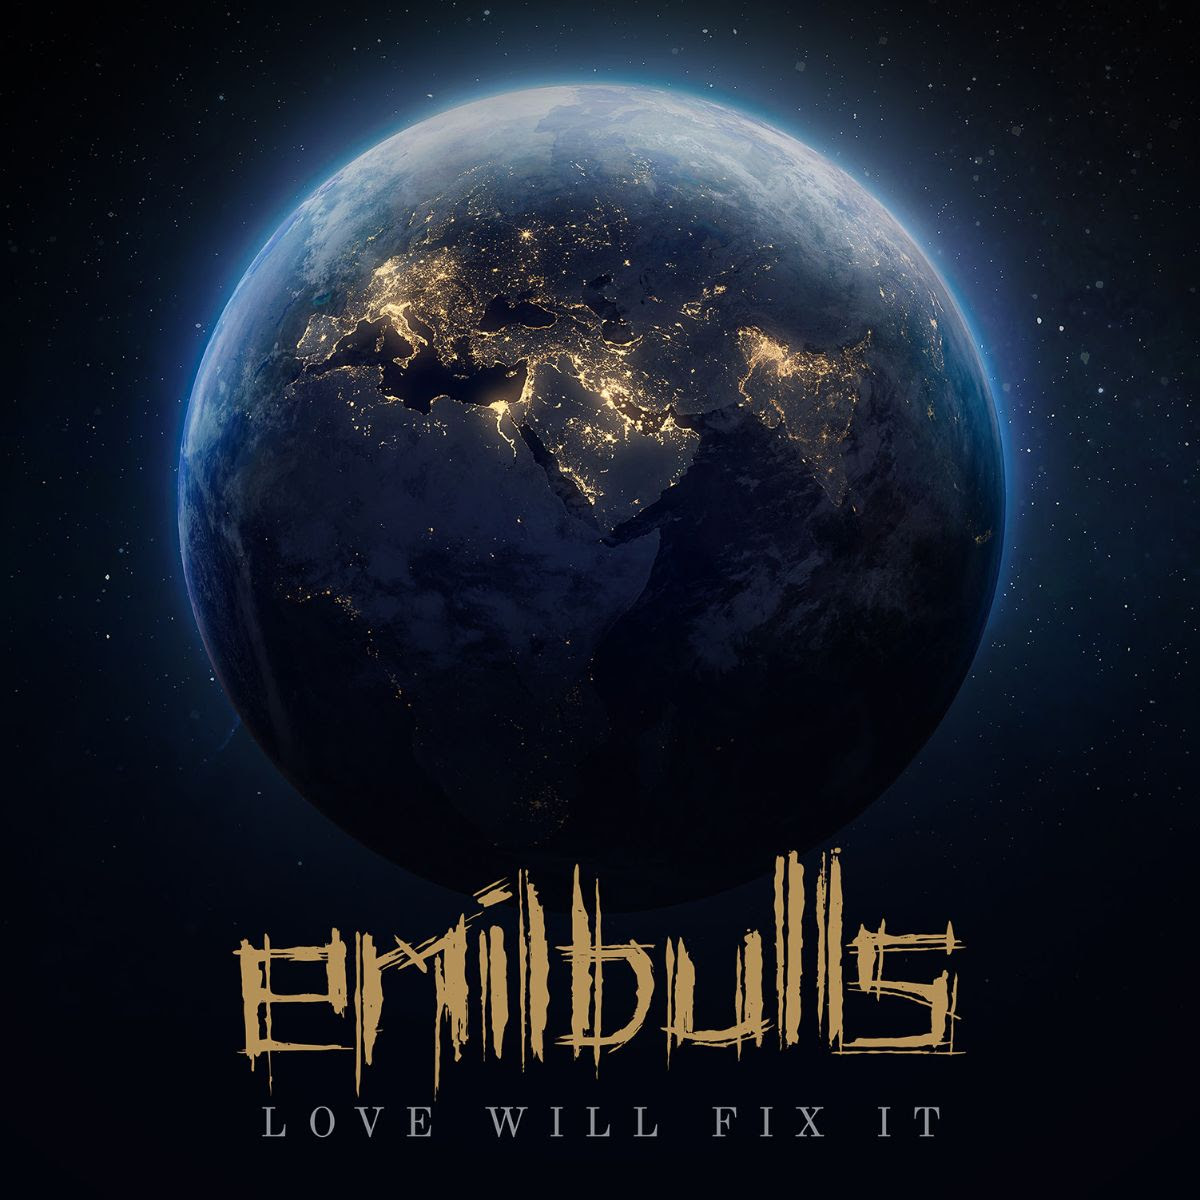 EMIL BULLS SHARES VIDEO FOR TITLE TRACK TO LOVE WILL FIX IT